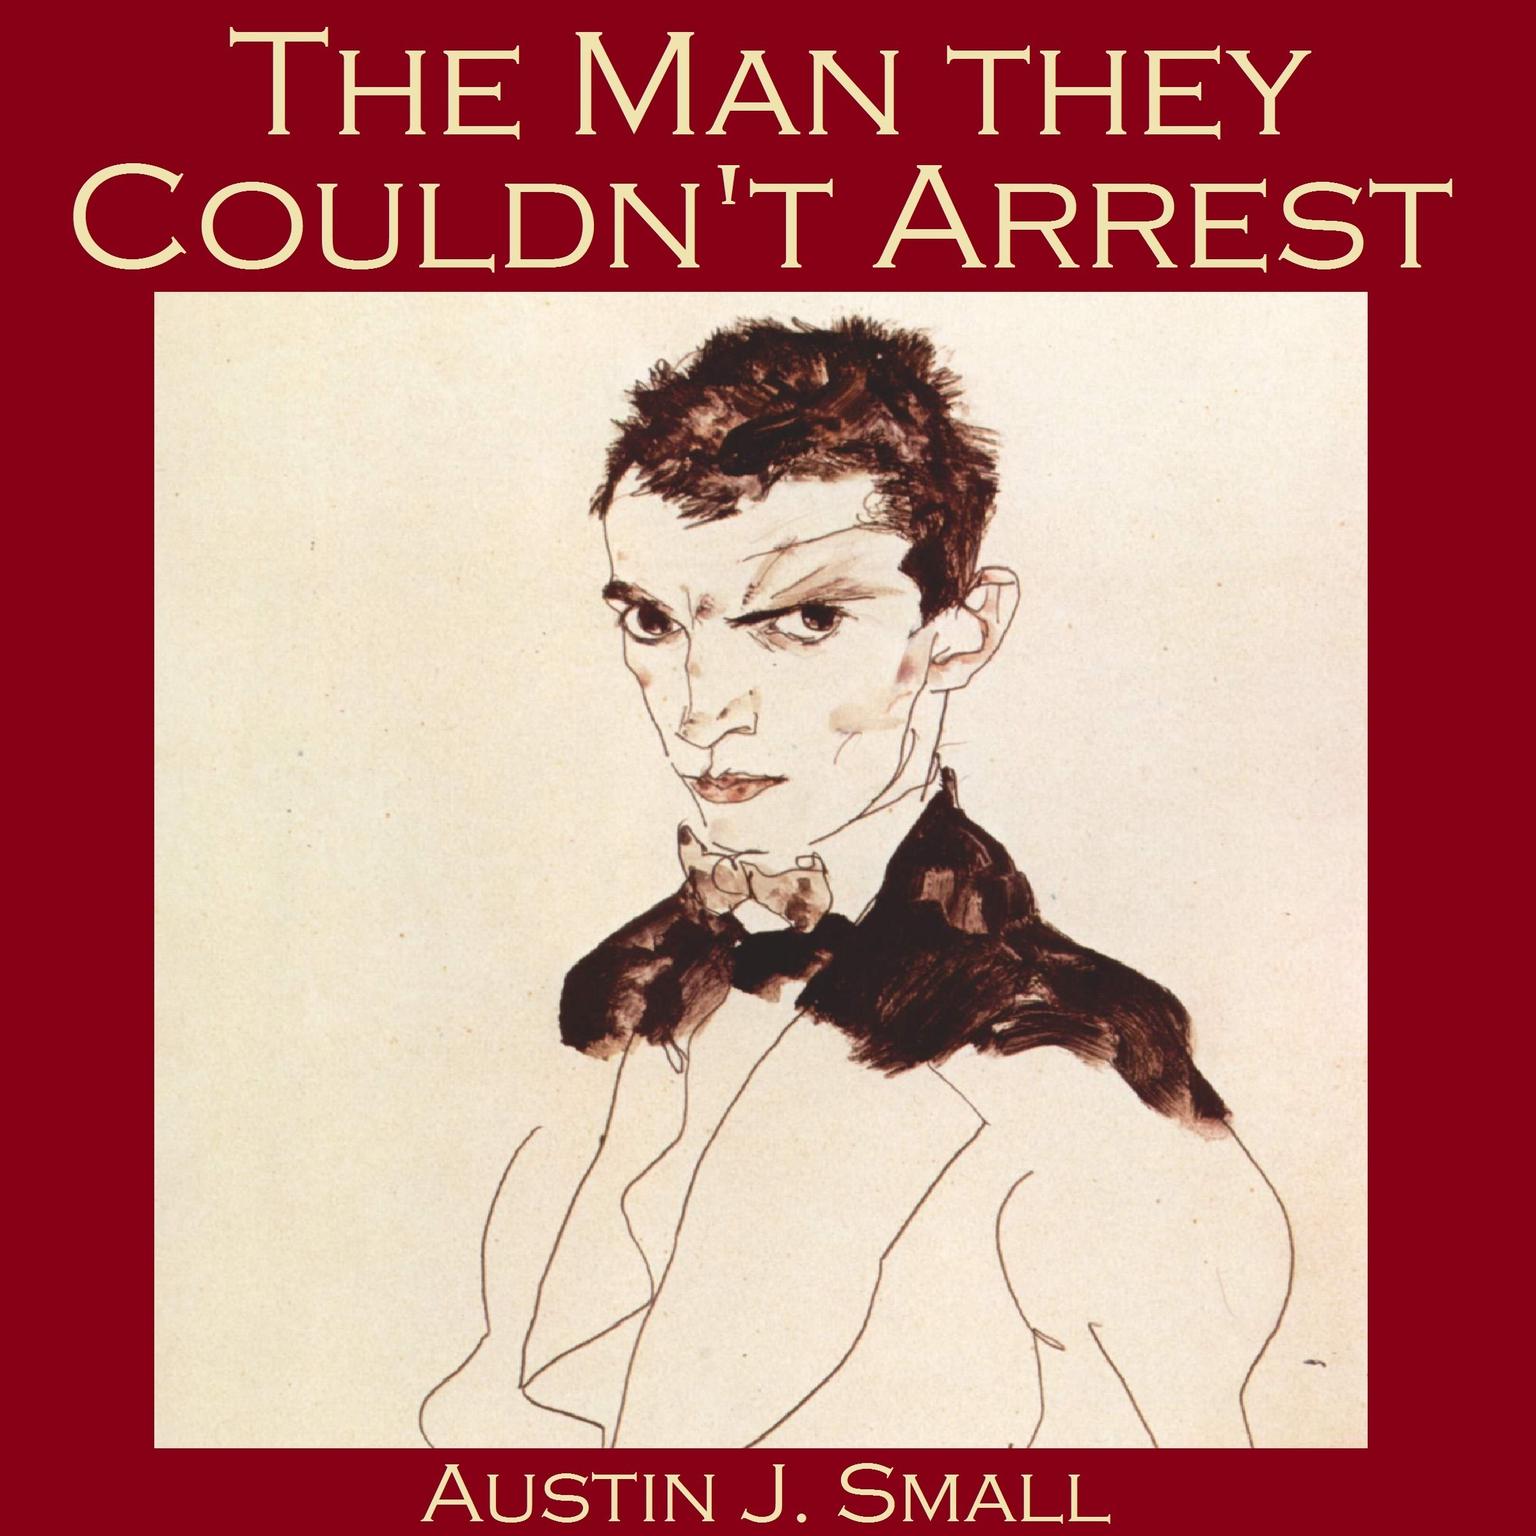 The Man They Couldnt Arrest Audiobook, by Austin J. Small